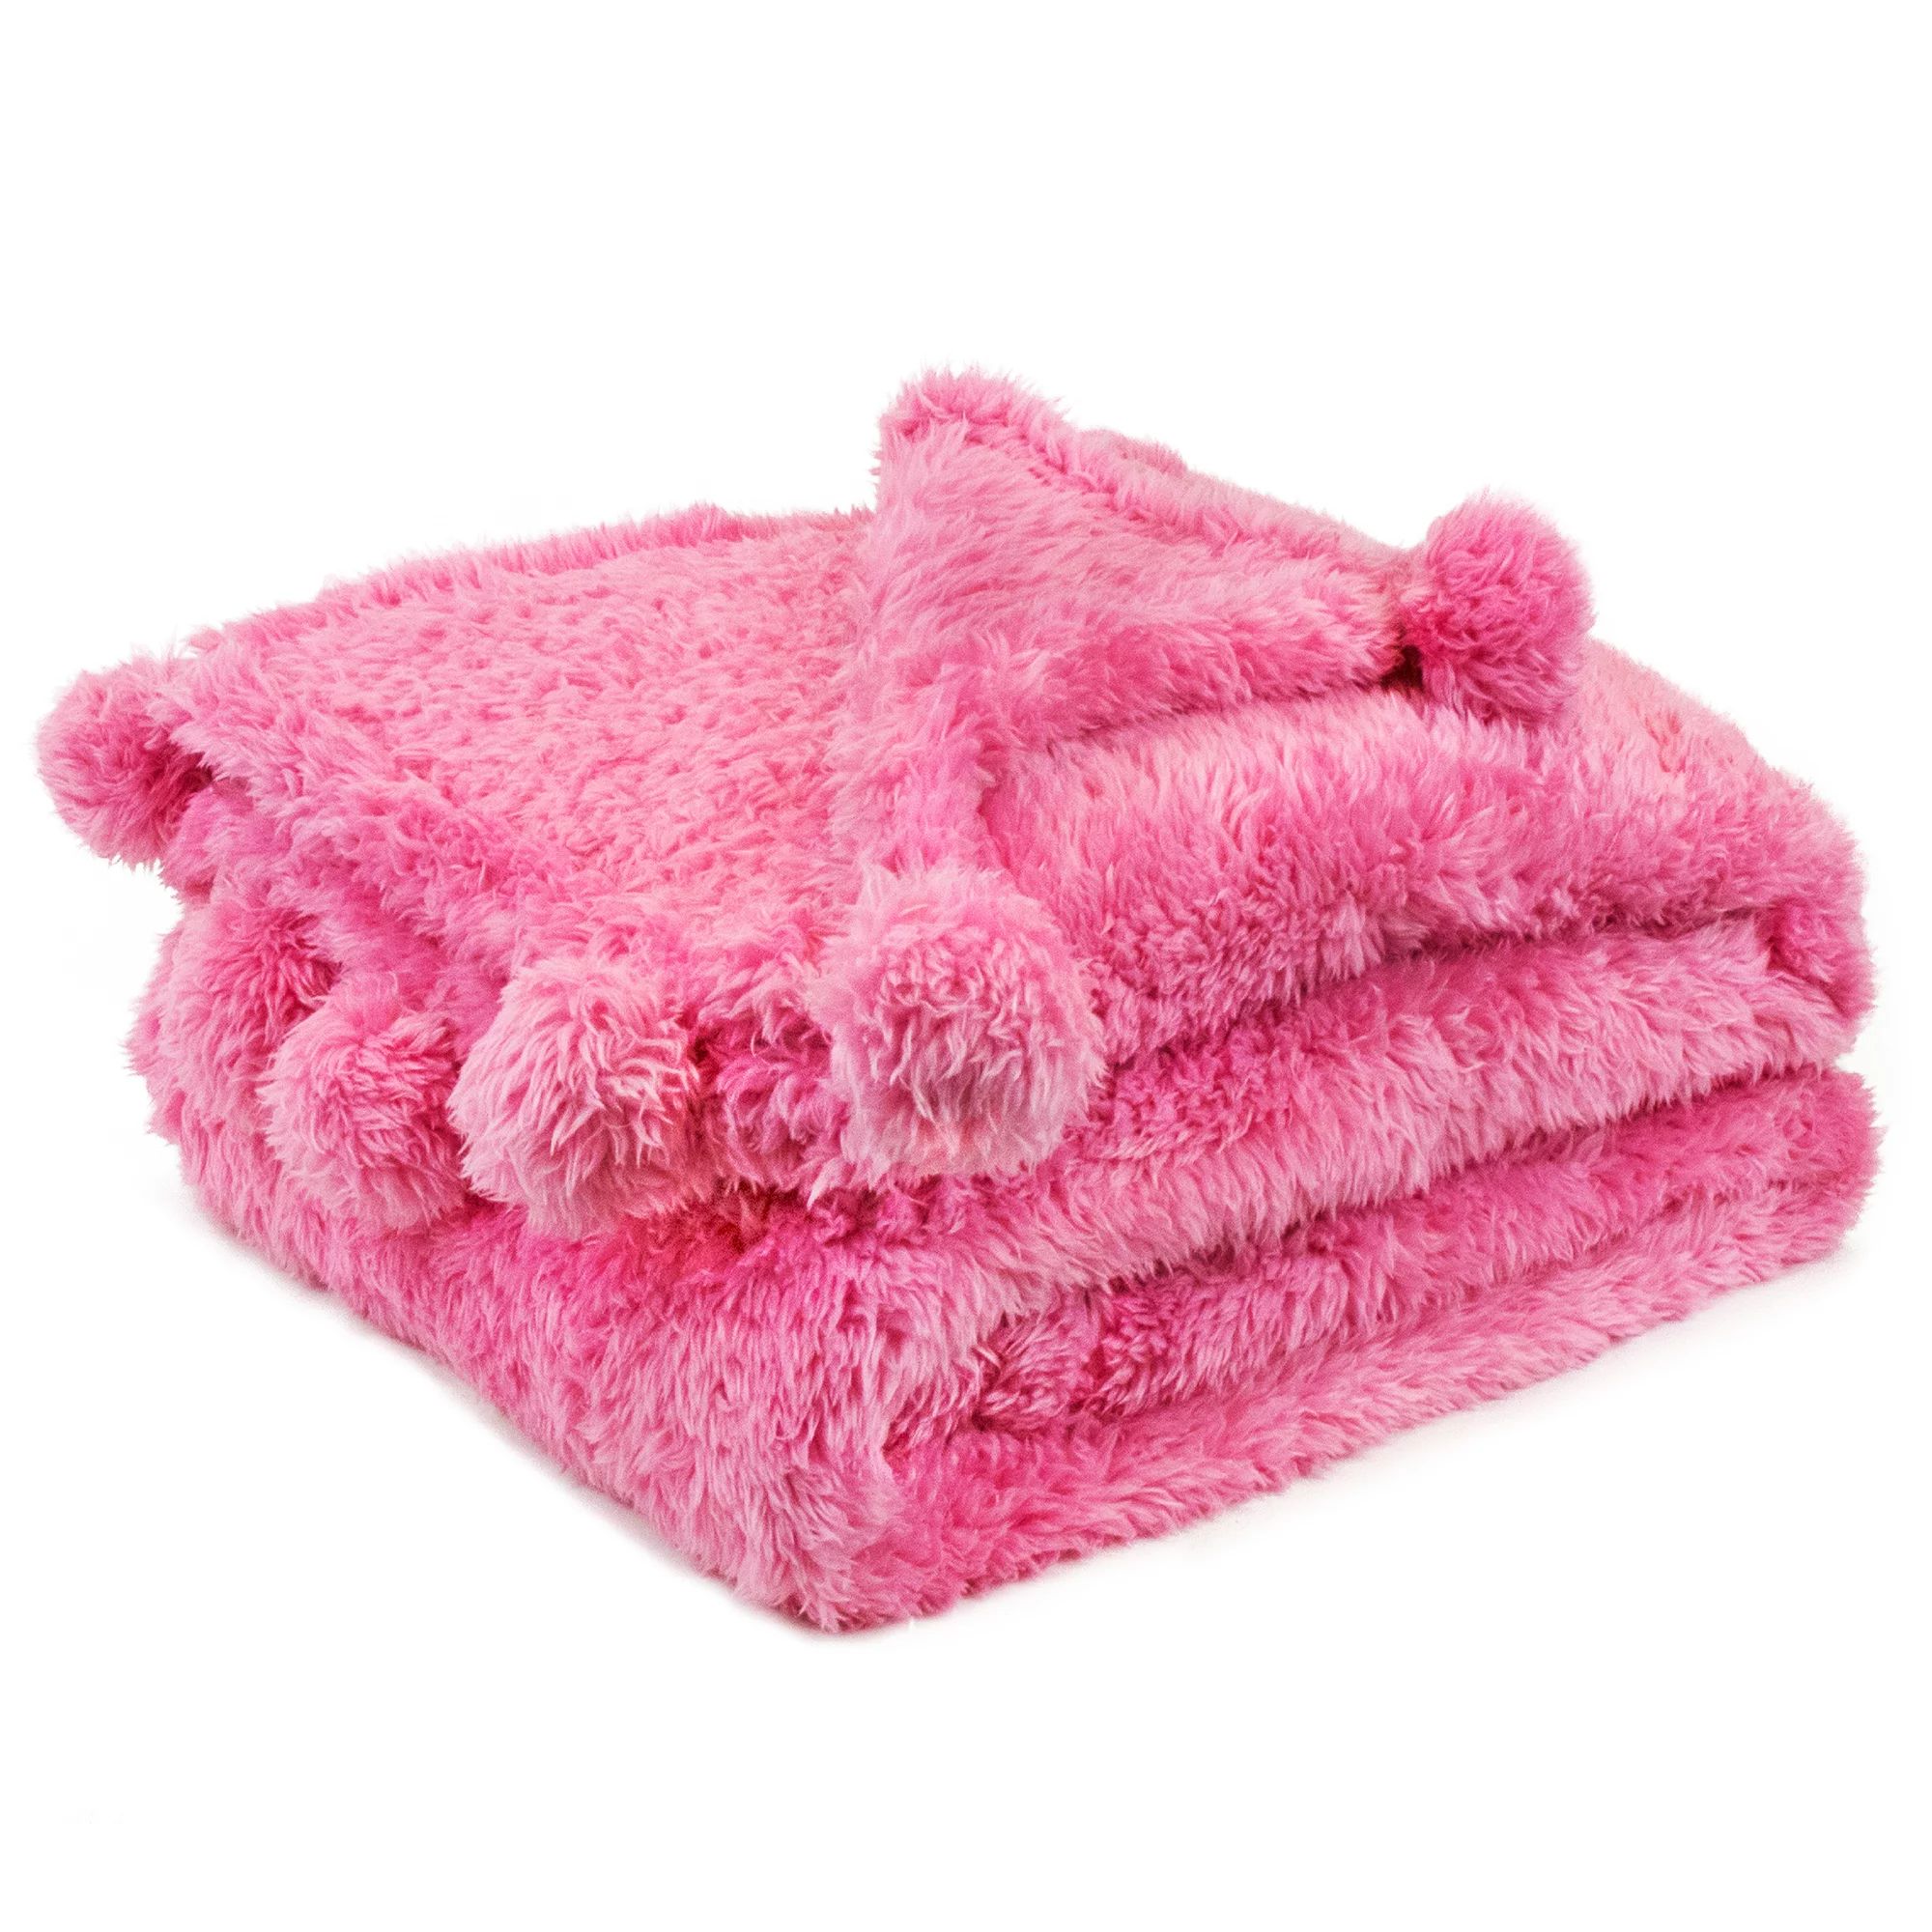 PAVILIA Hot Pink Sherpa Throw Blanket for Couch, Pom Pom | Fluffy Plush Soft Blanket for Sofa Bed... | Walmart (US)